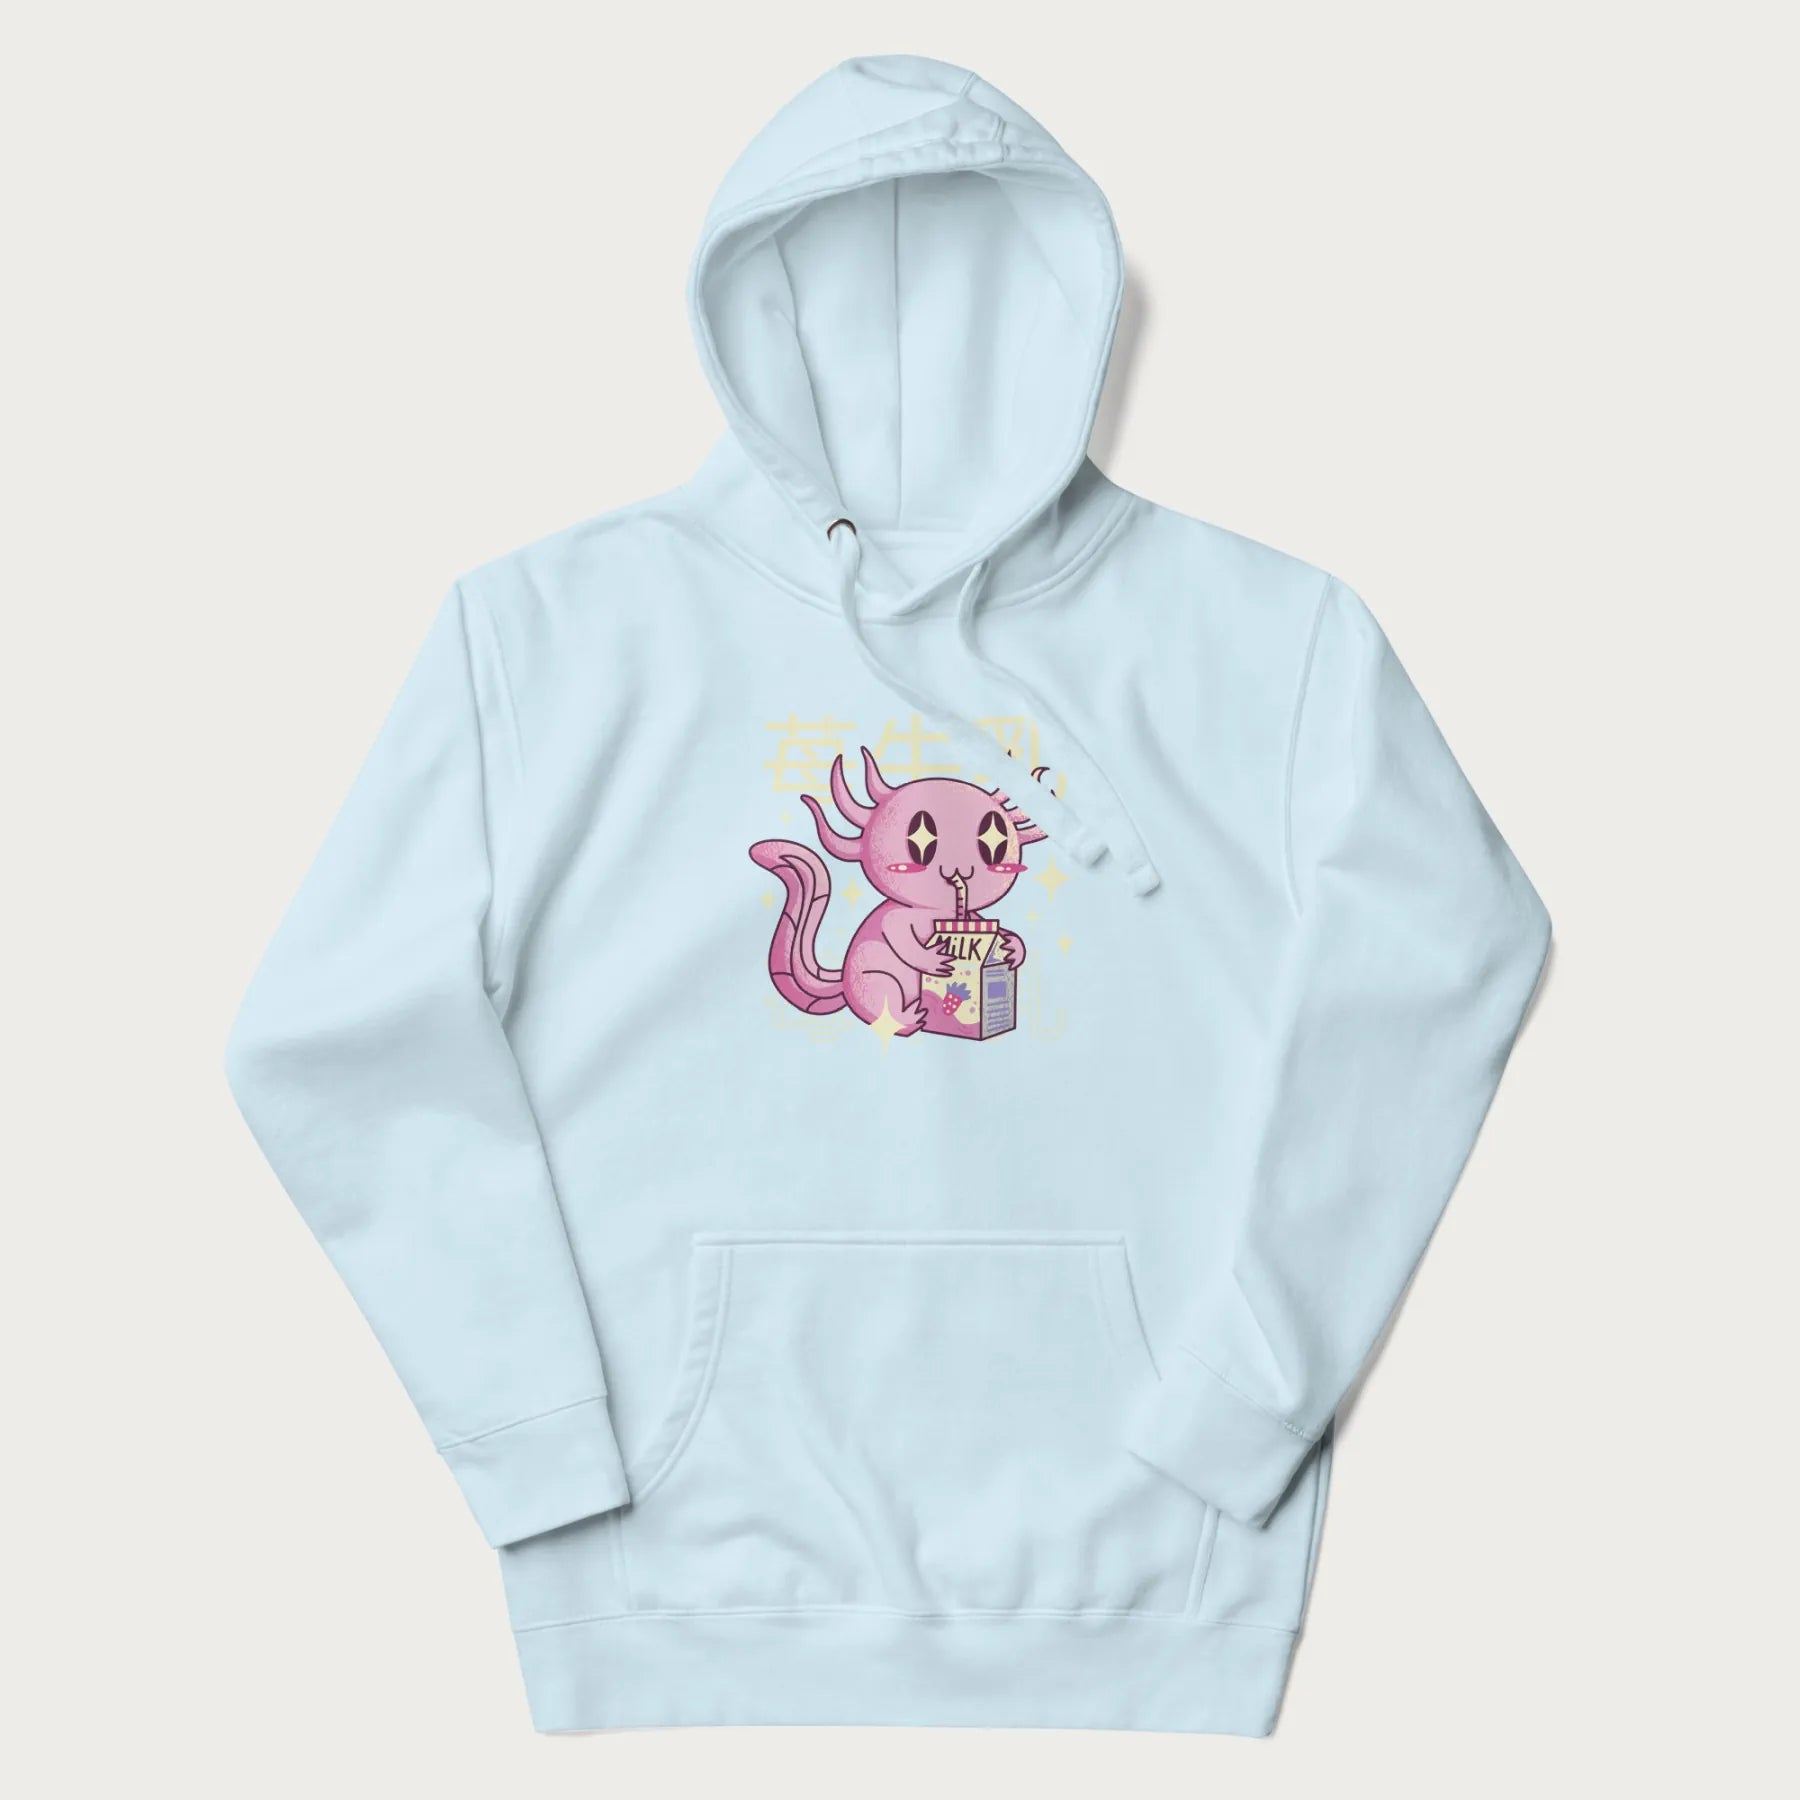 Light blue hoodie with Japanese graphic of a cute pink axolotl sipping strawberry milk from a carton, with Japanese text '苺牛乳' (Strawberry Milk).